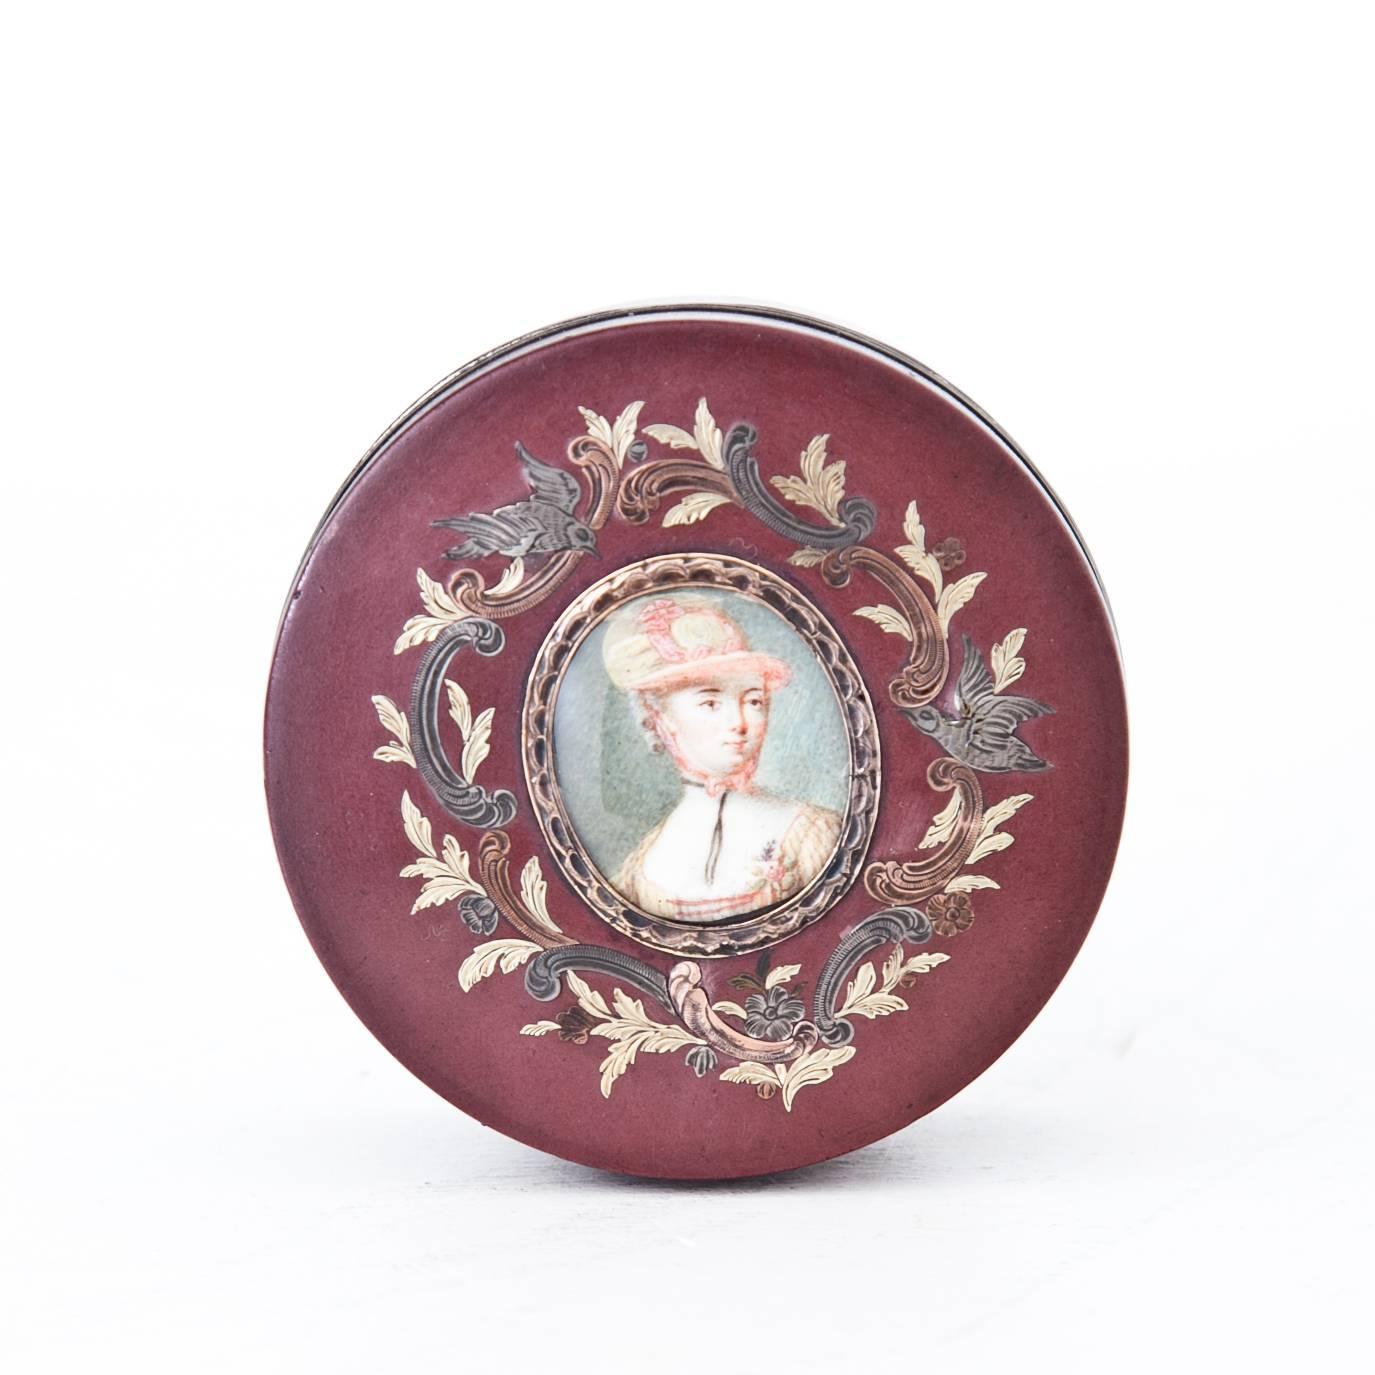 Victorian Round Lidded Box, France, Second Half of the 18th Century